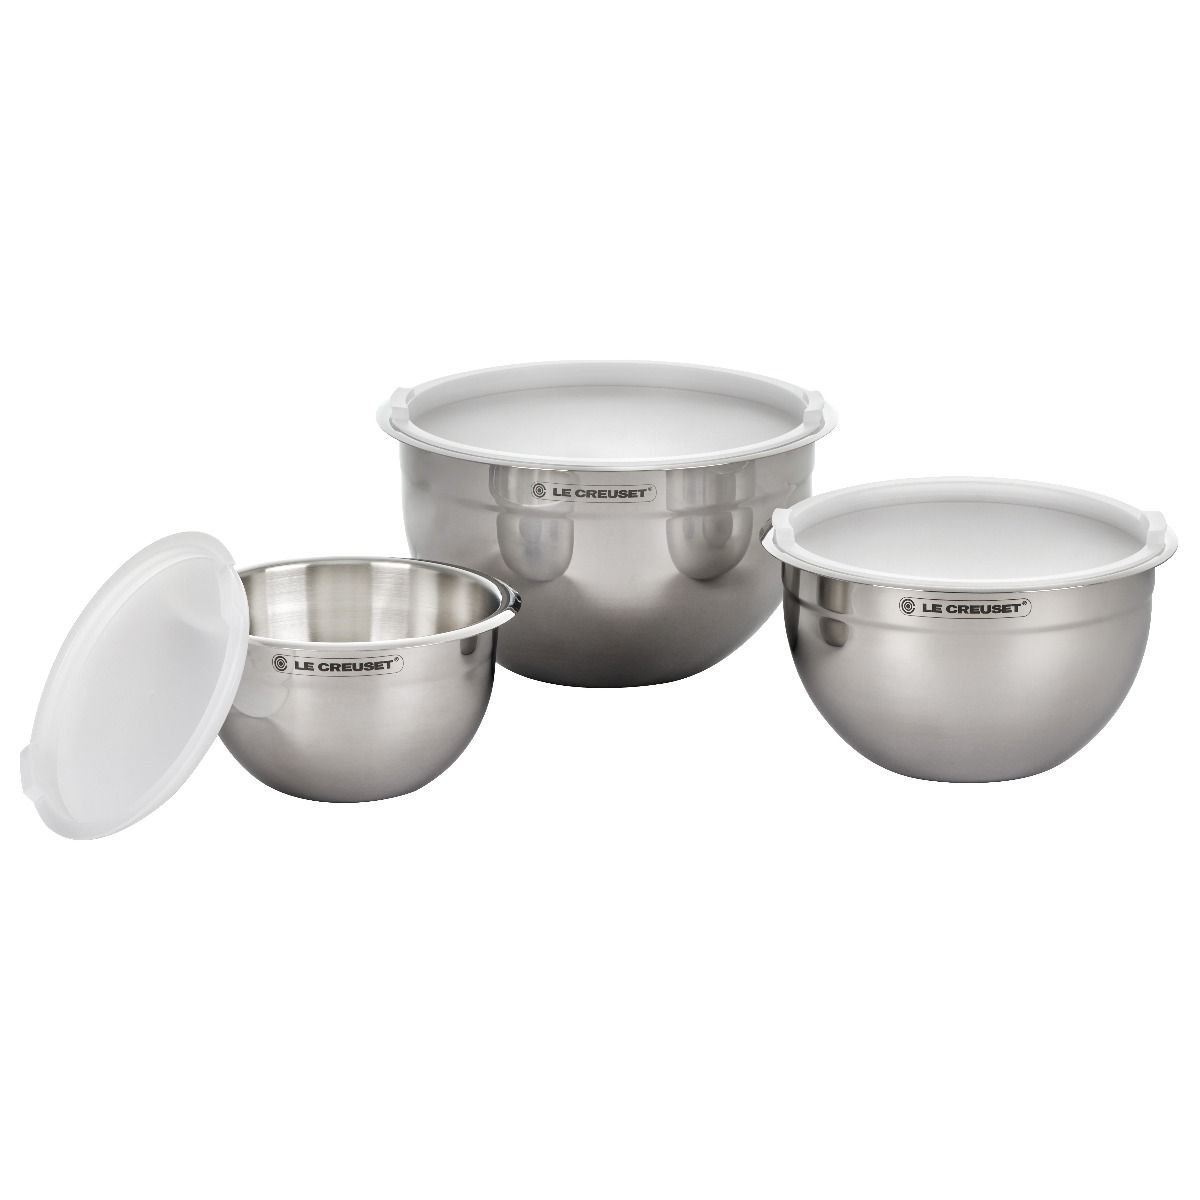 Ovente Premium Stainless Steel Mixing Bowls with Lids, Set of 3 Nesting  Bowls Includes 1.5, 3.5